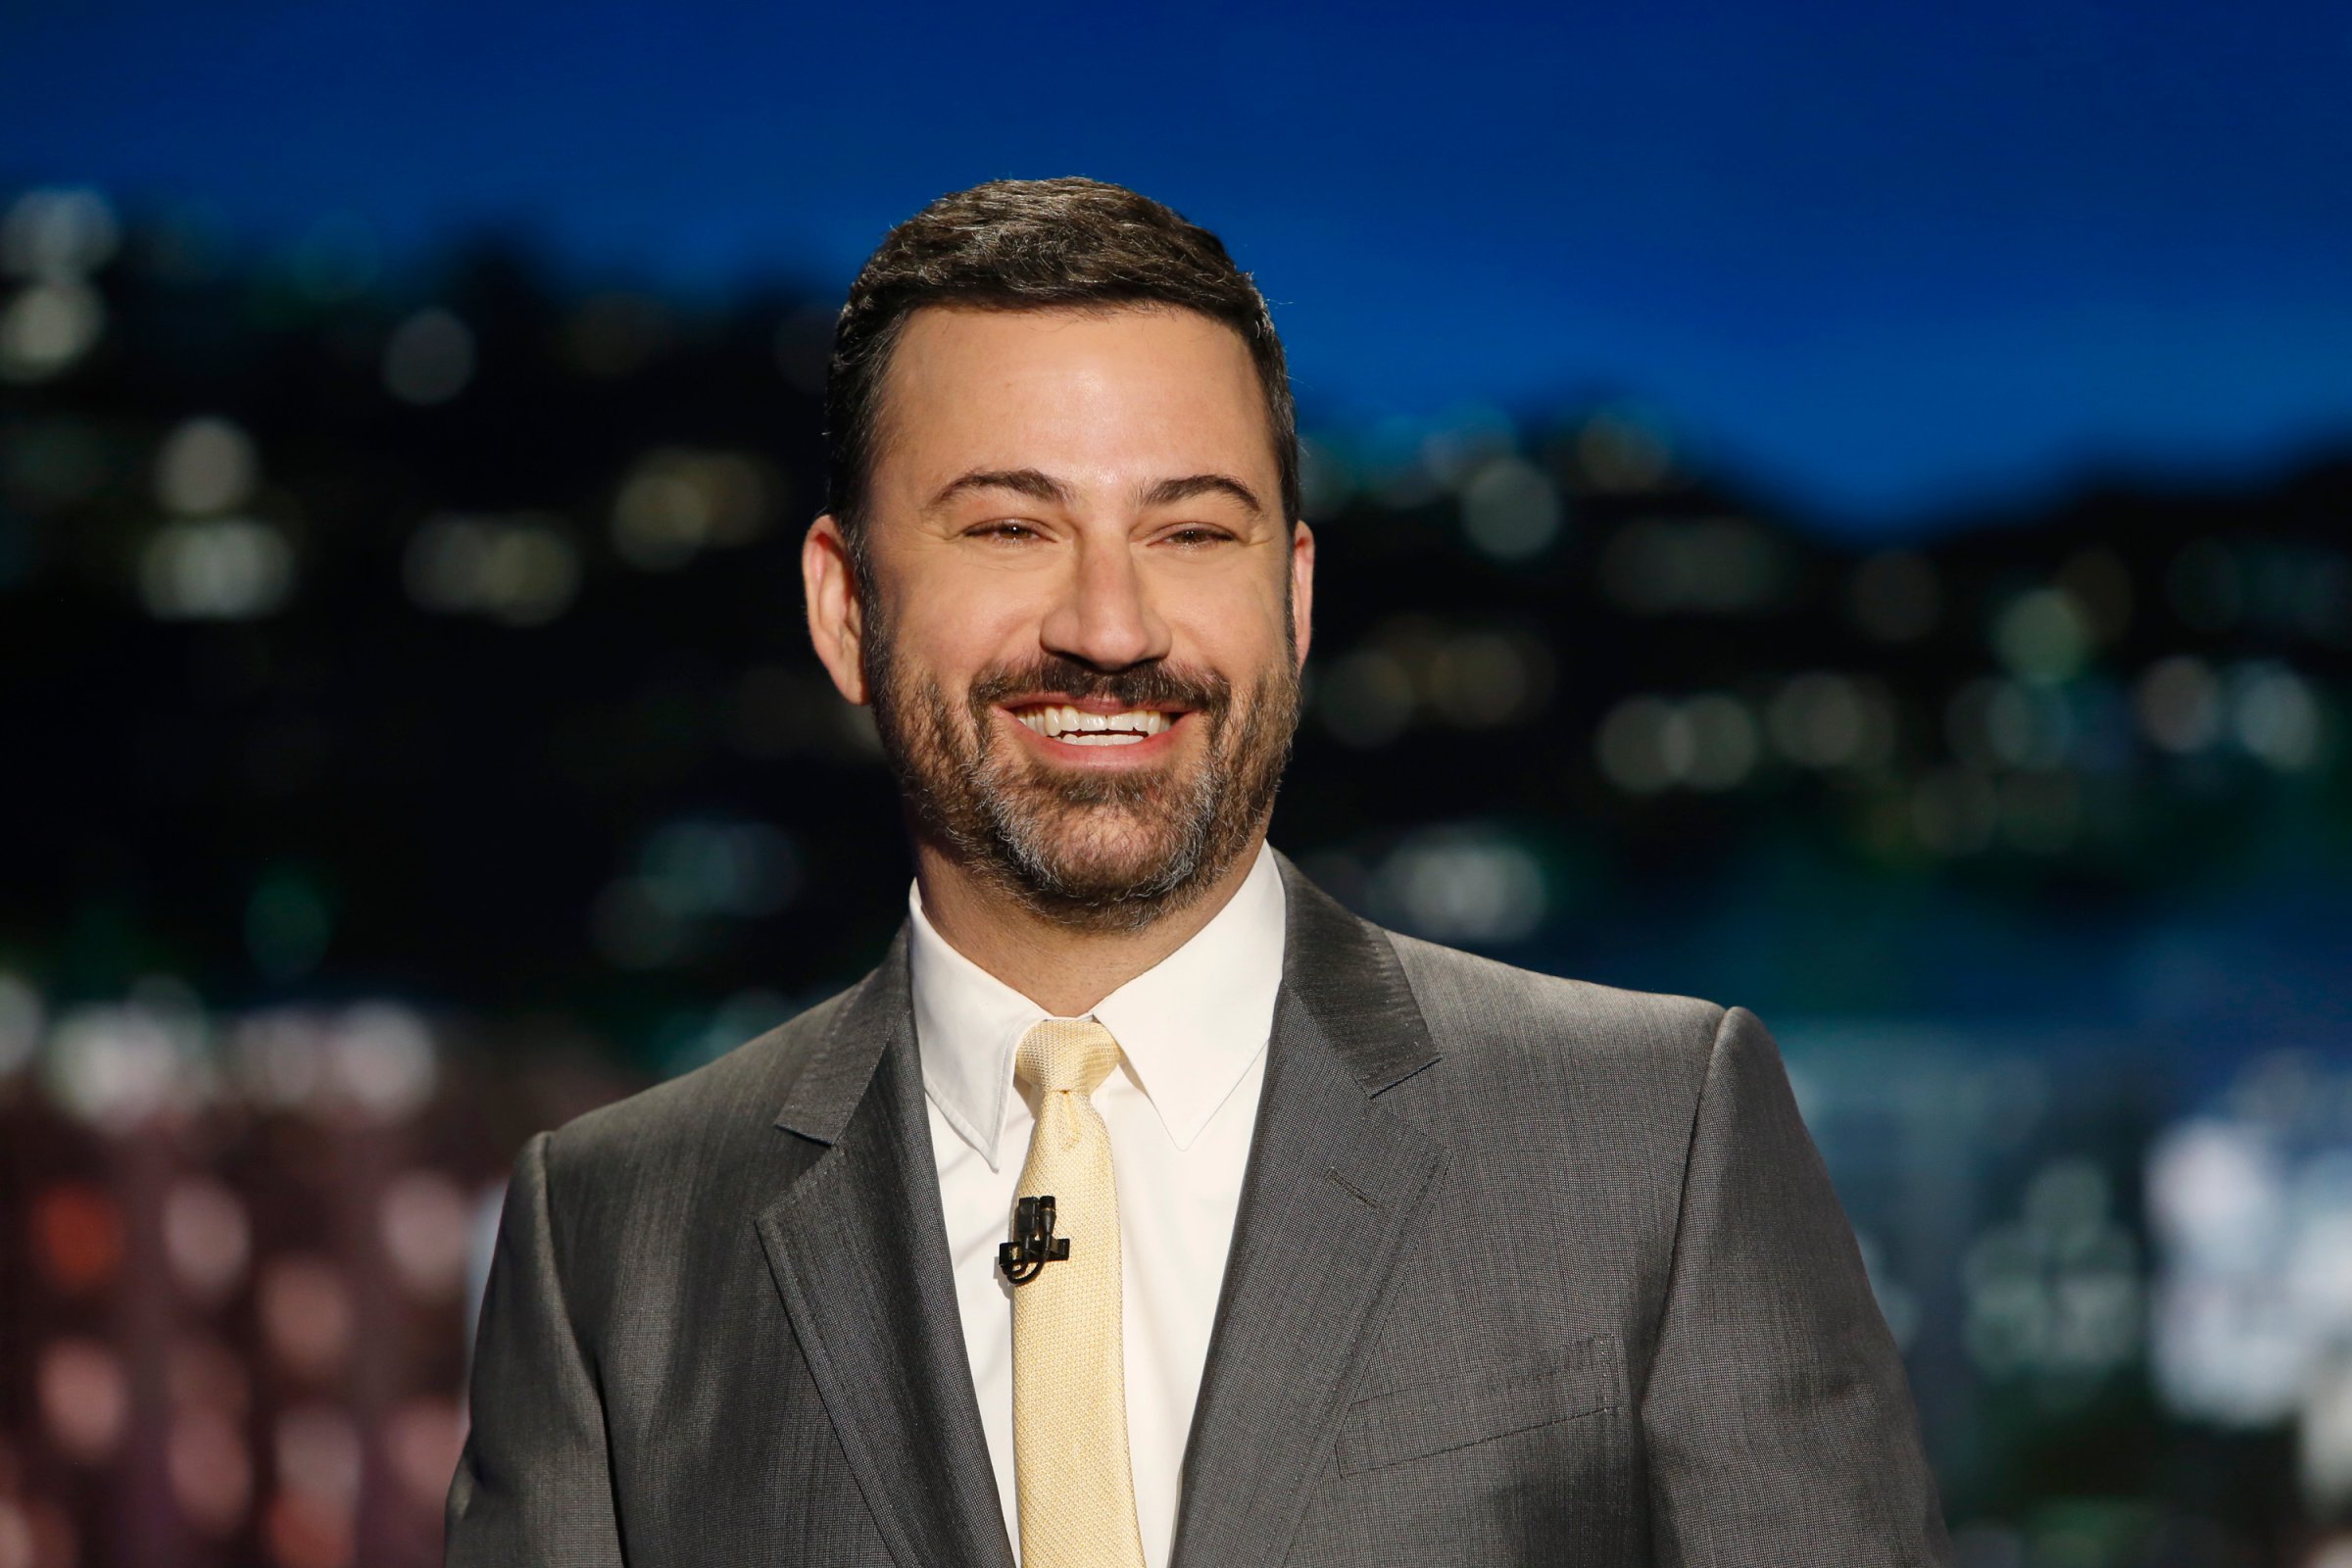 Jimmy Kimmel speaks in front of his audience at 'Jimmy Kimmel Live.'